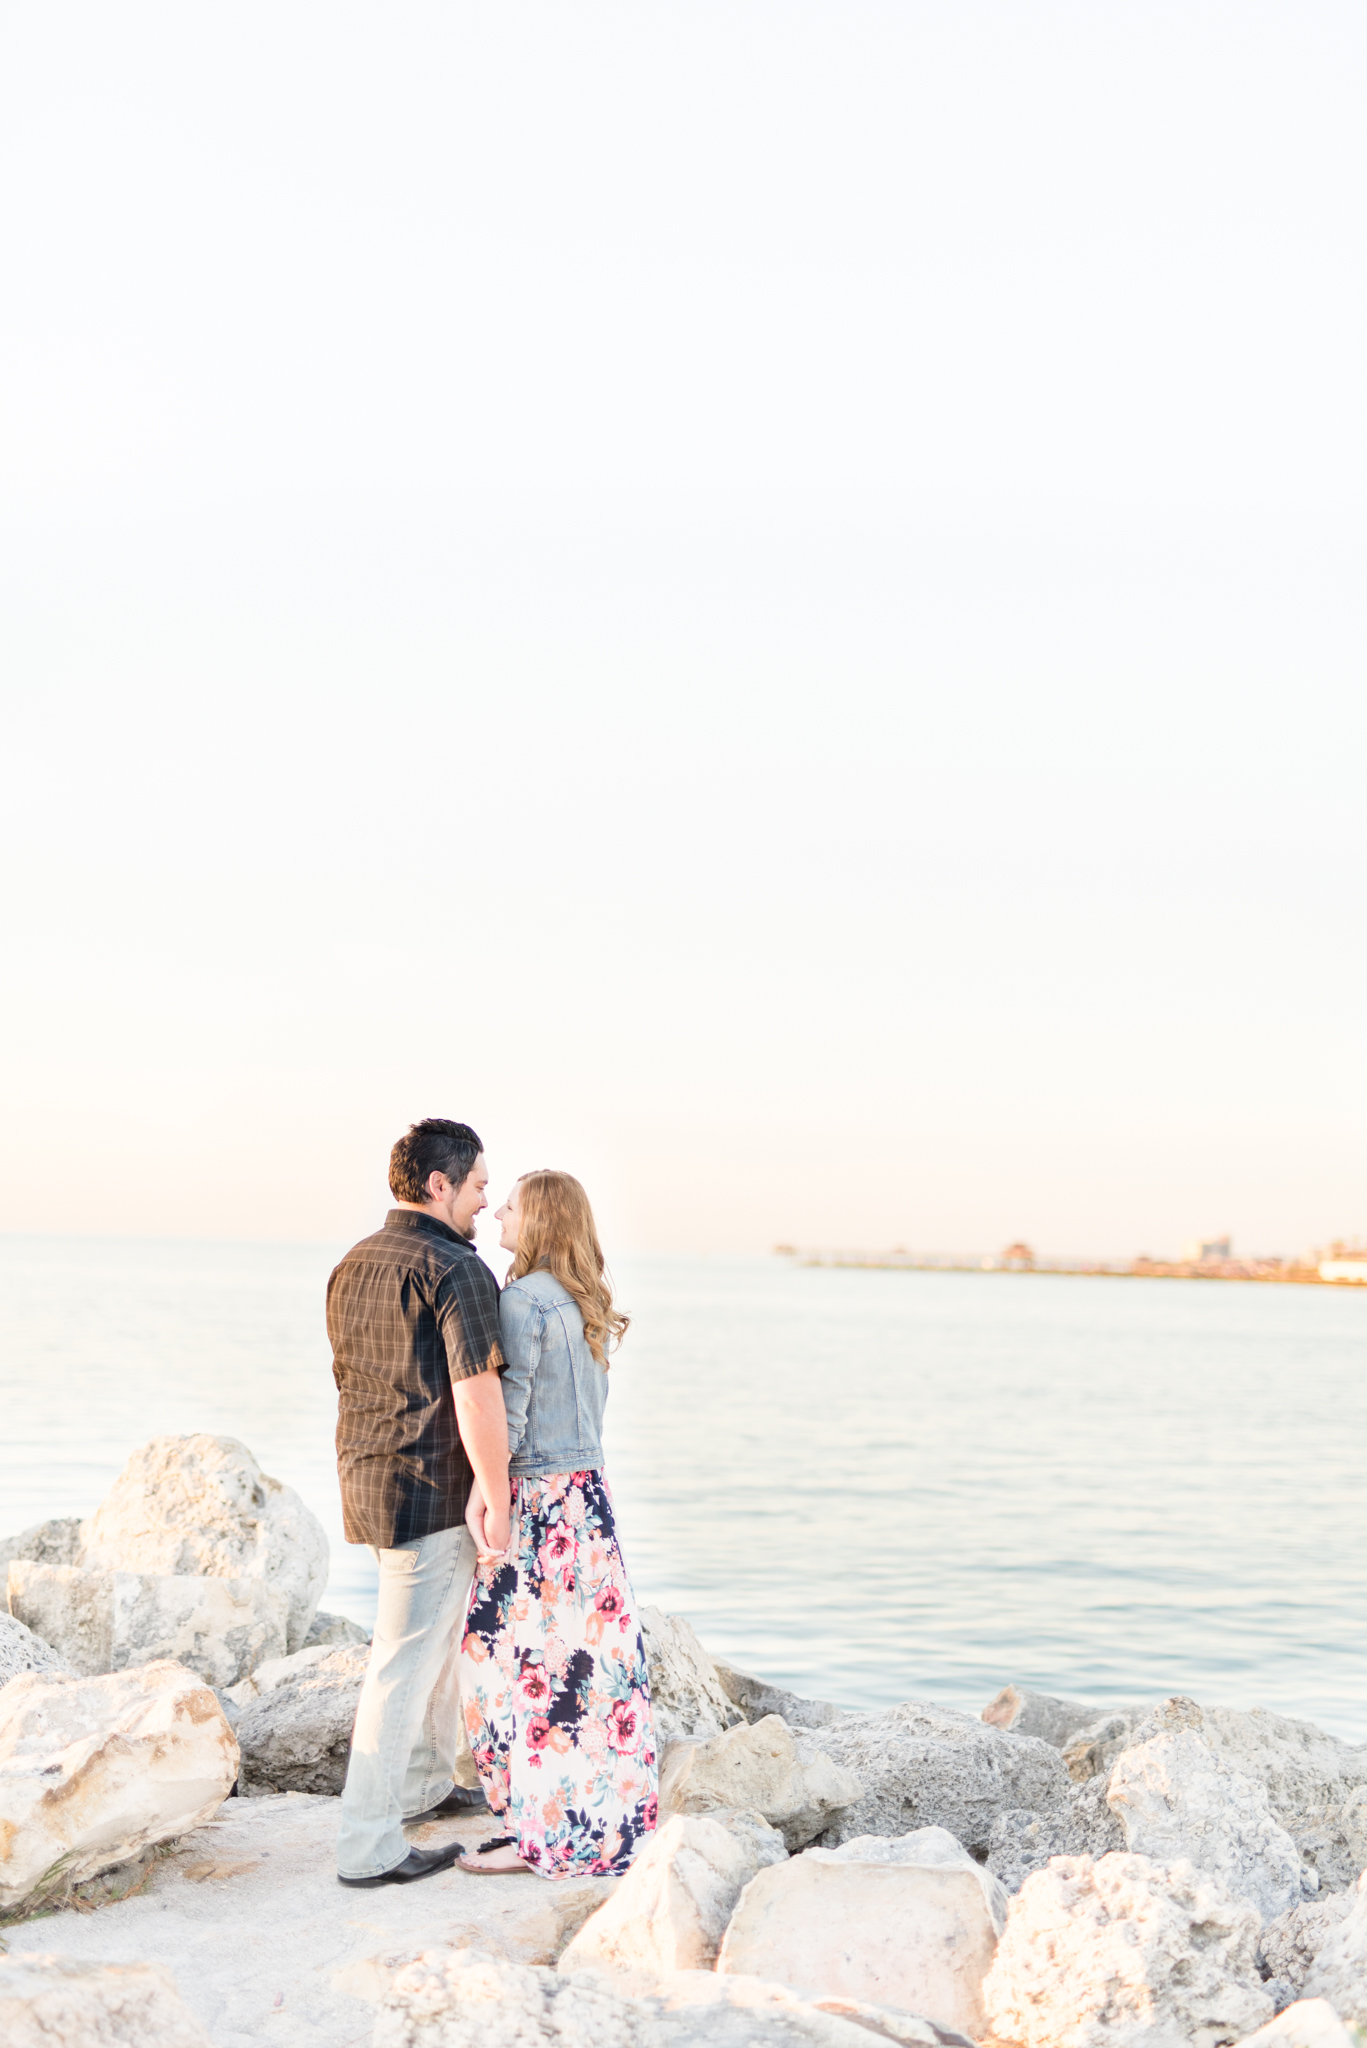 Couple stands on rocks next to ocean.